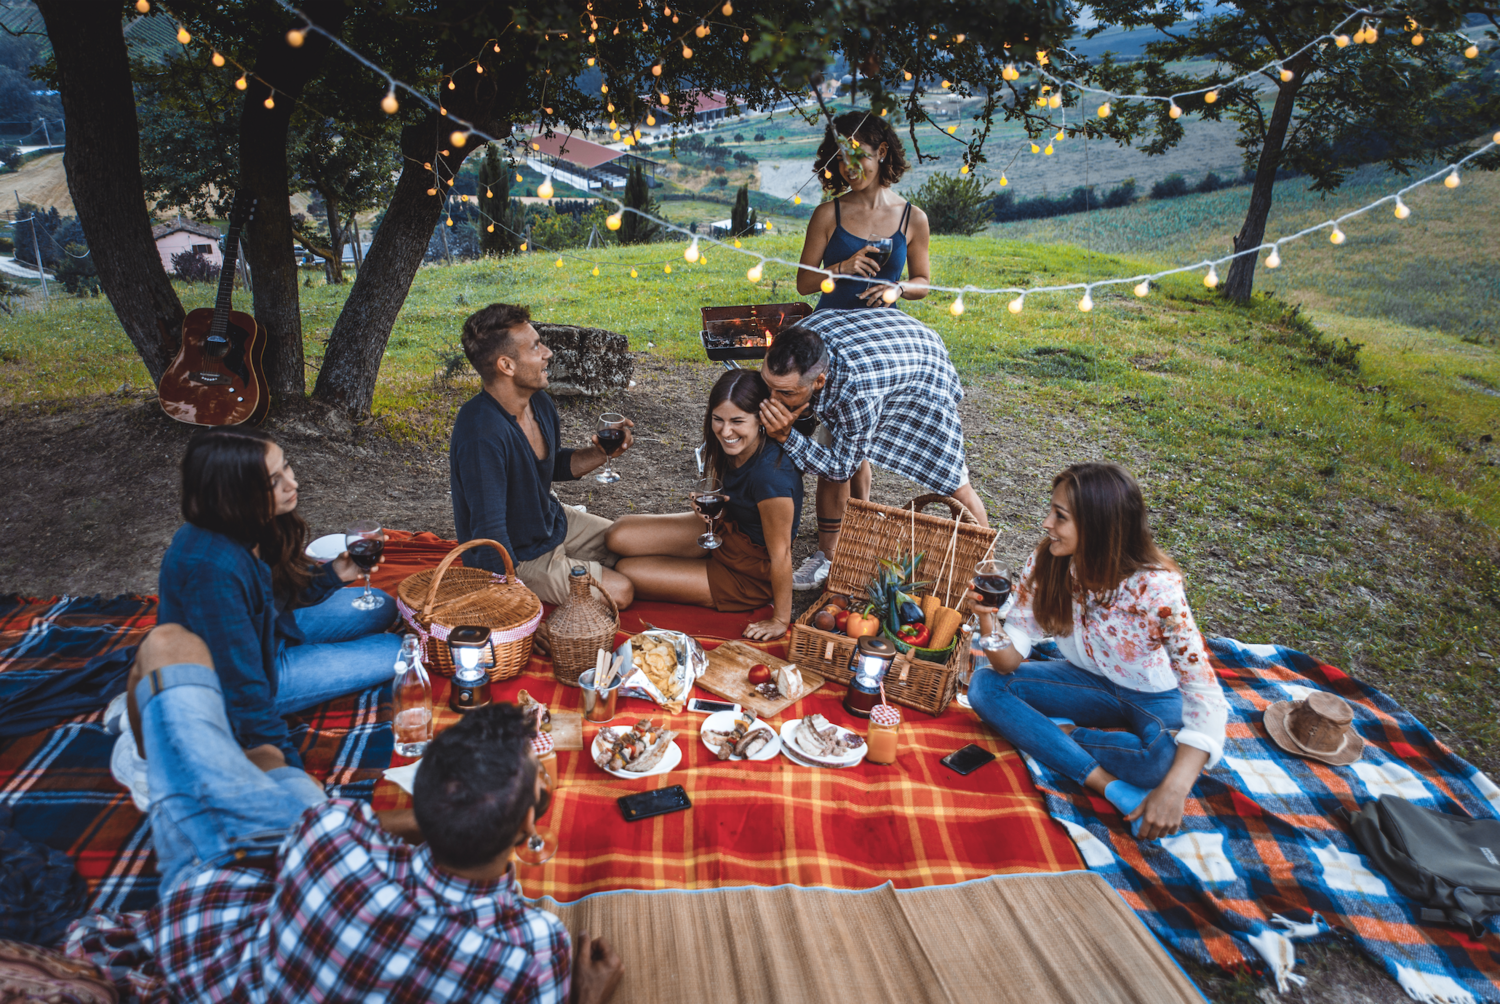 Top 6 Unique Christmas Picnic Ideas (For Friends and Family) - AmazingCo